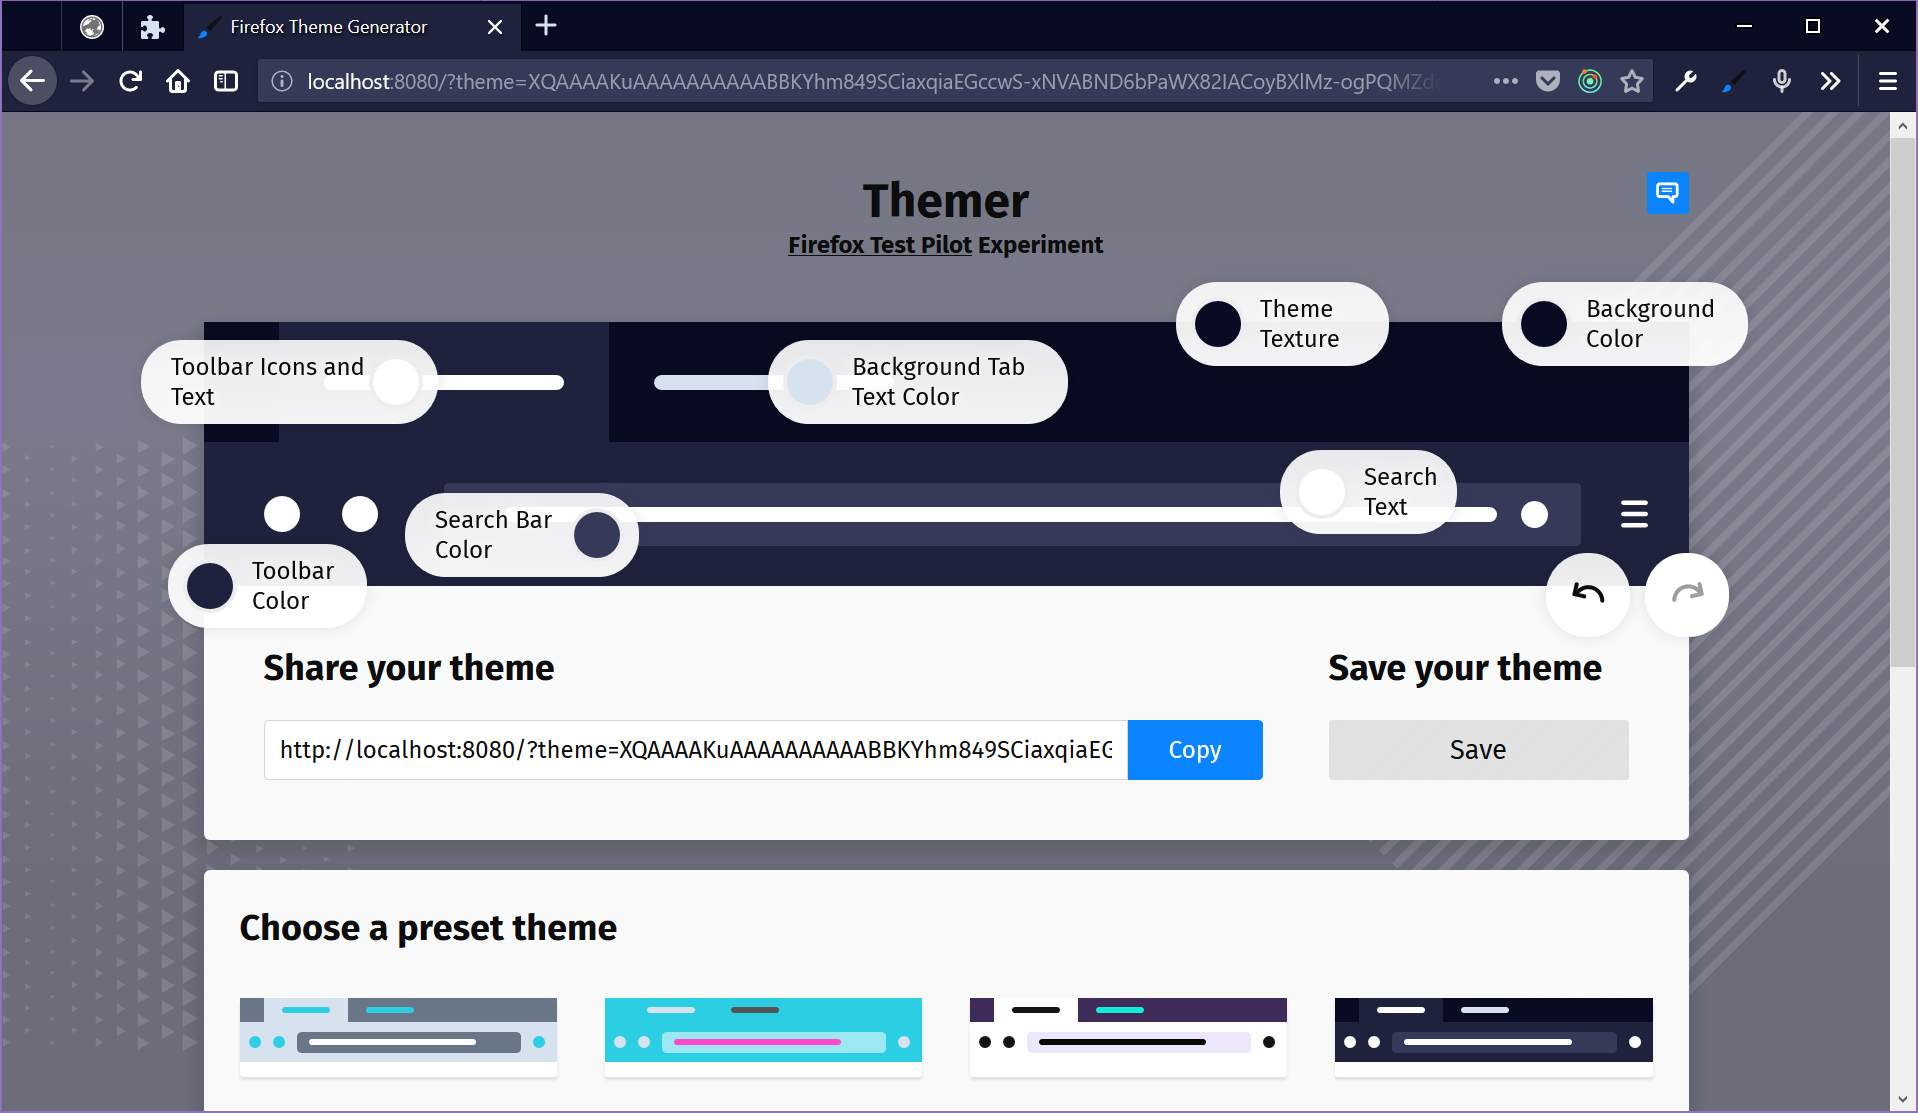 An early snapshot of Themer in development